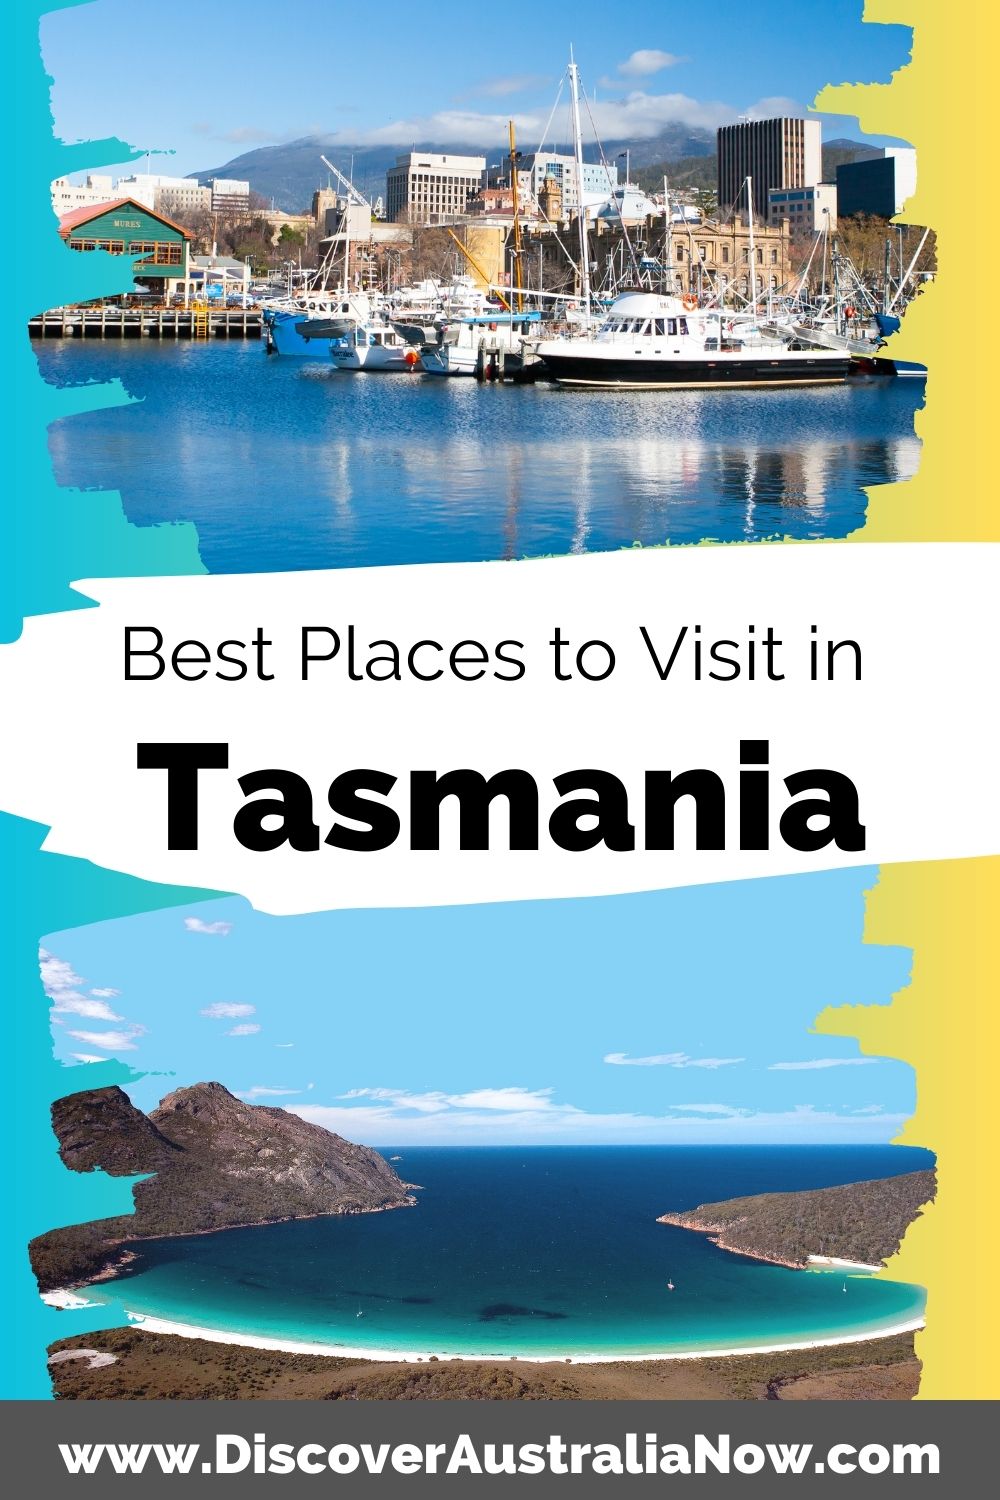 Docks at Hobart and Wineglass Bay are two places to visit in Tasmania.